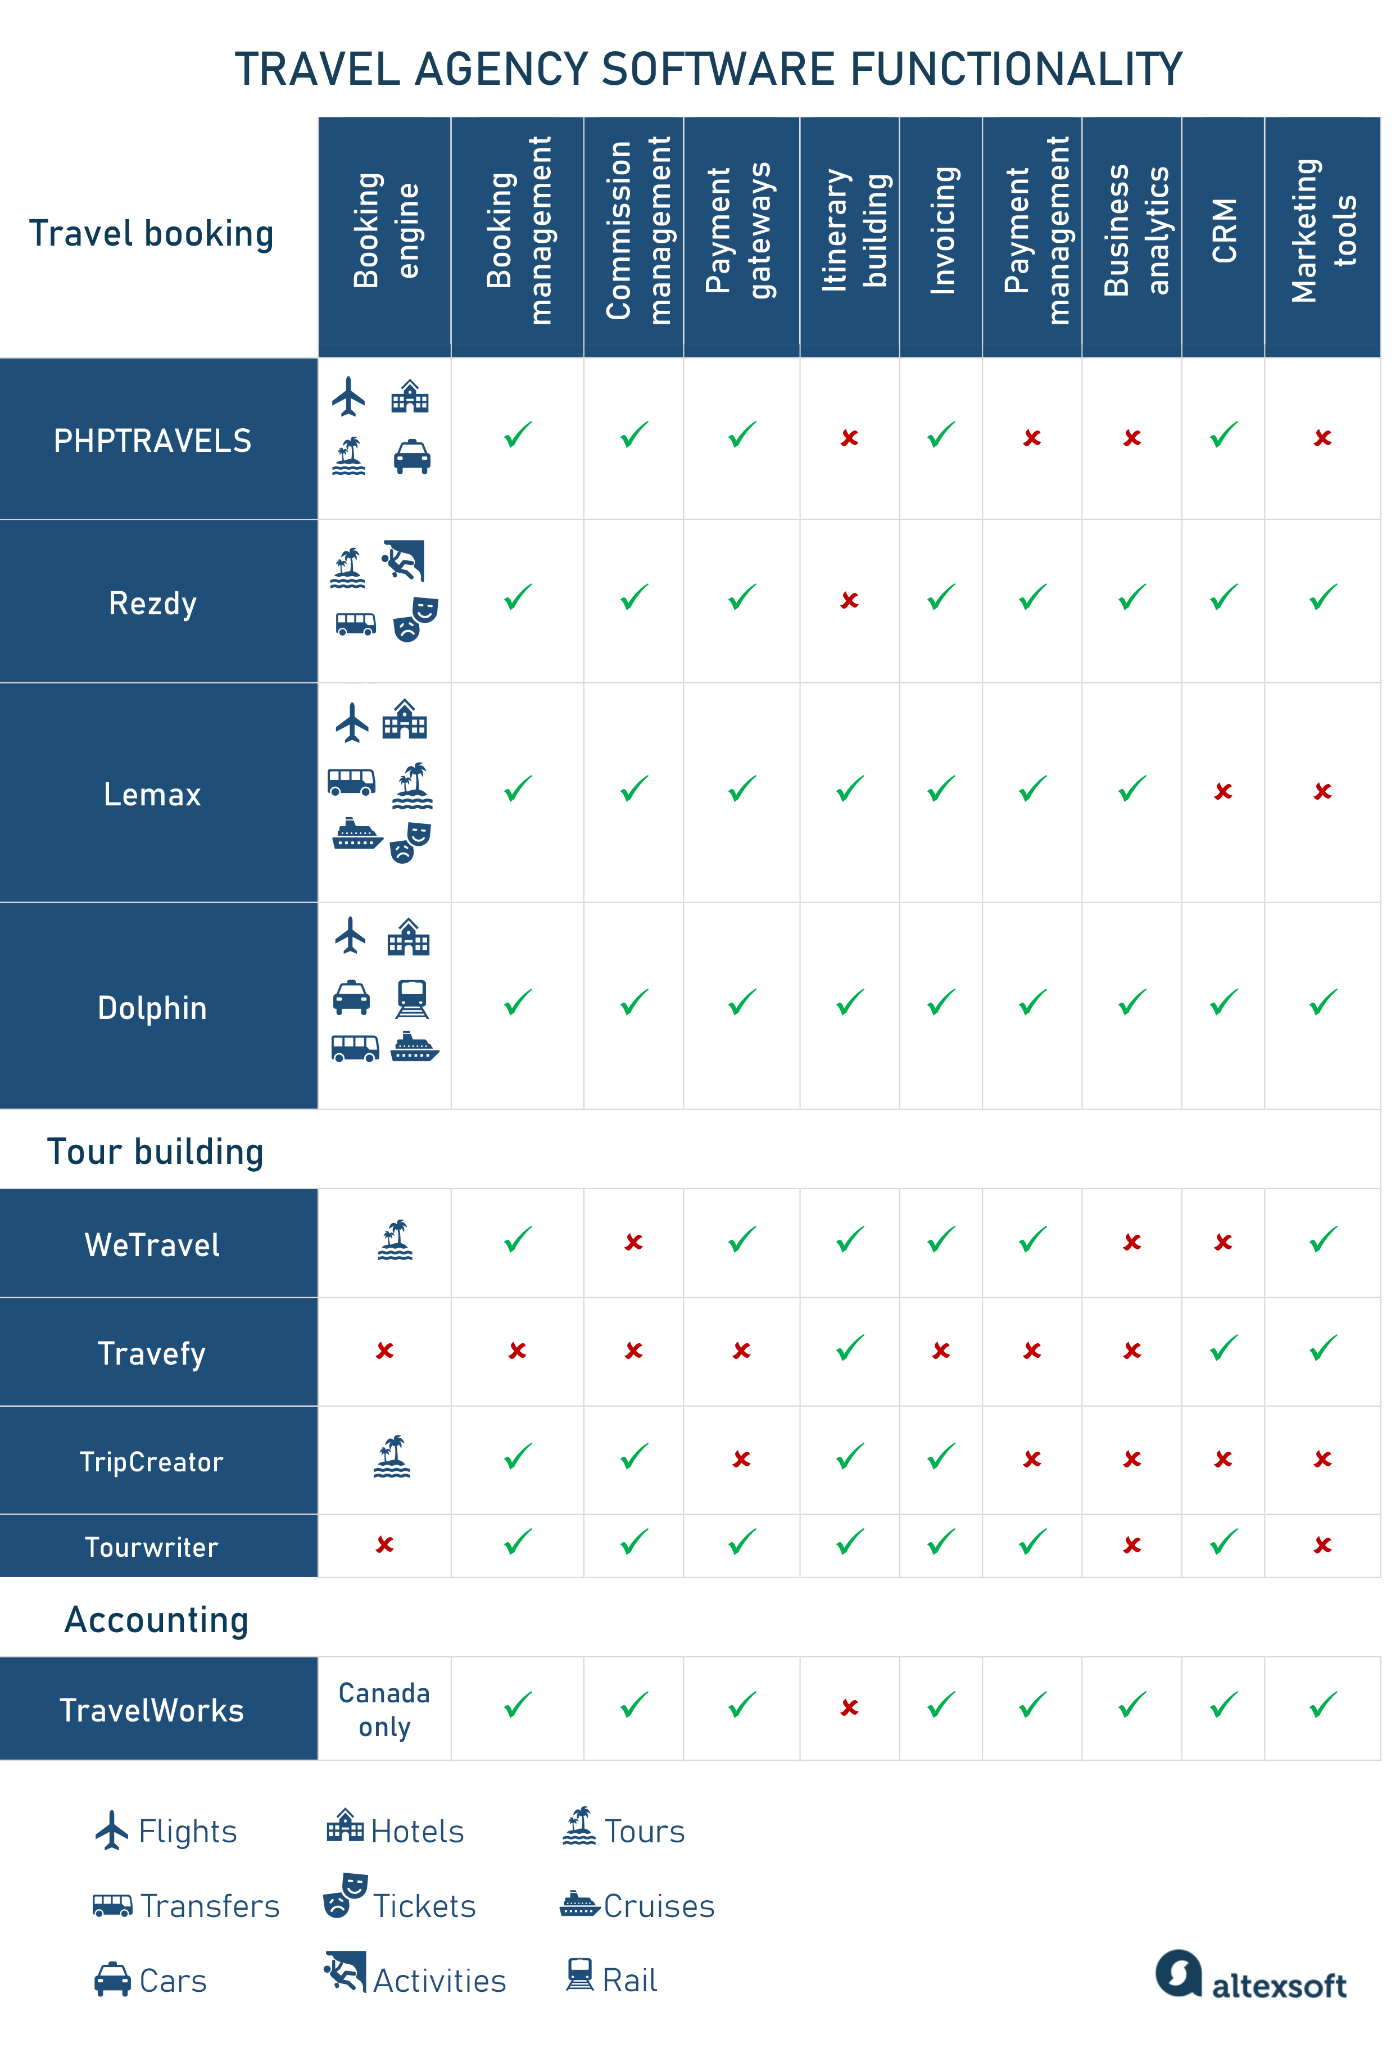 Travel agency software functionality